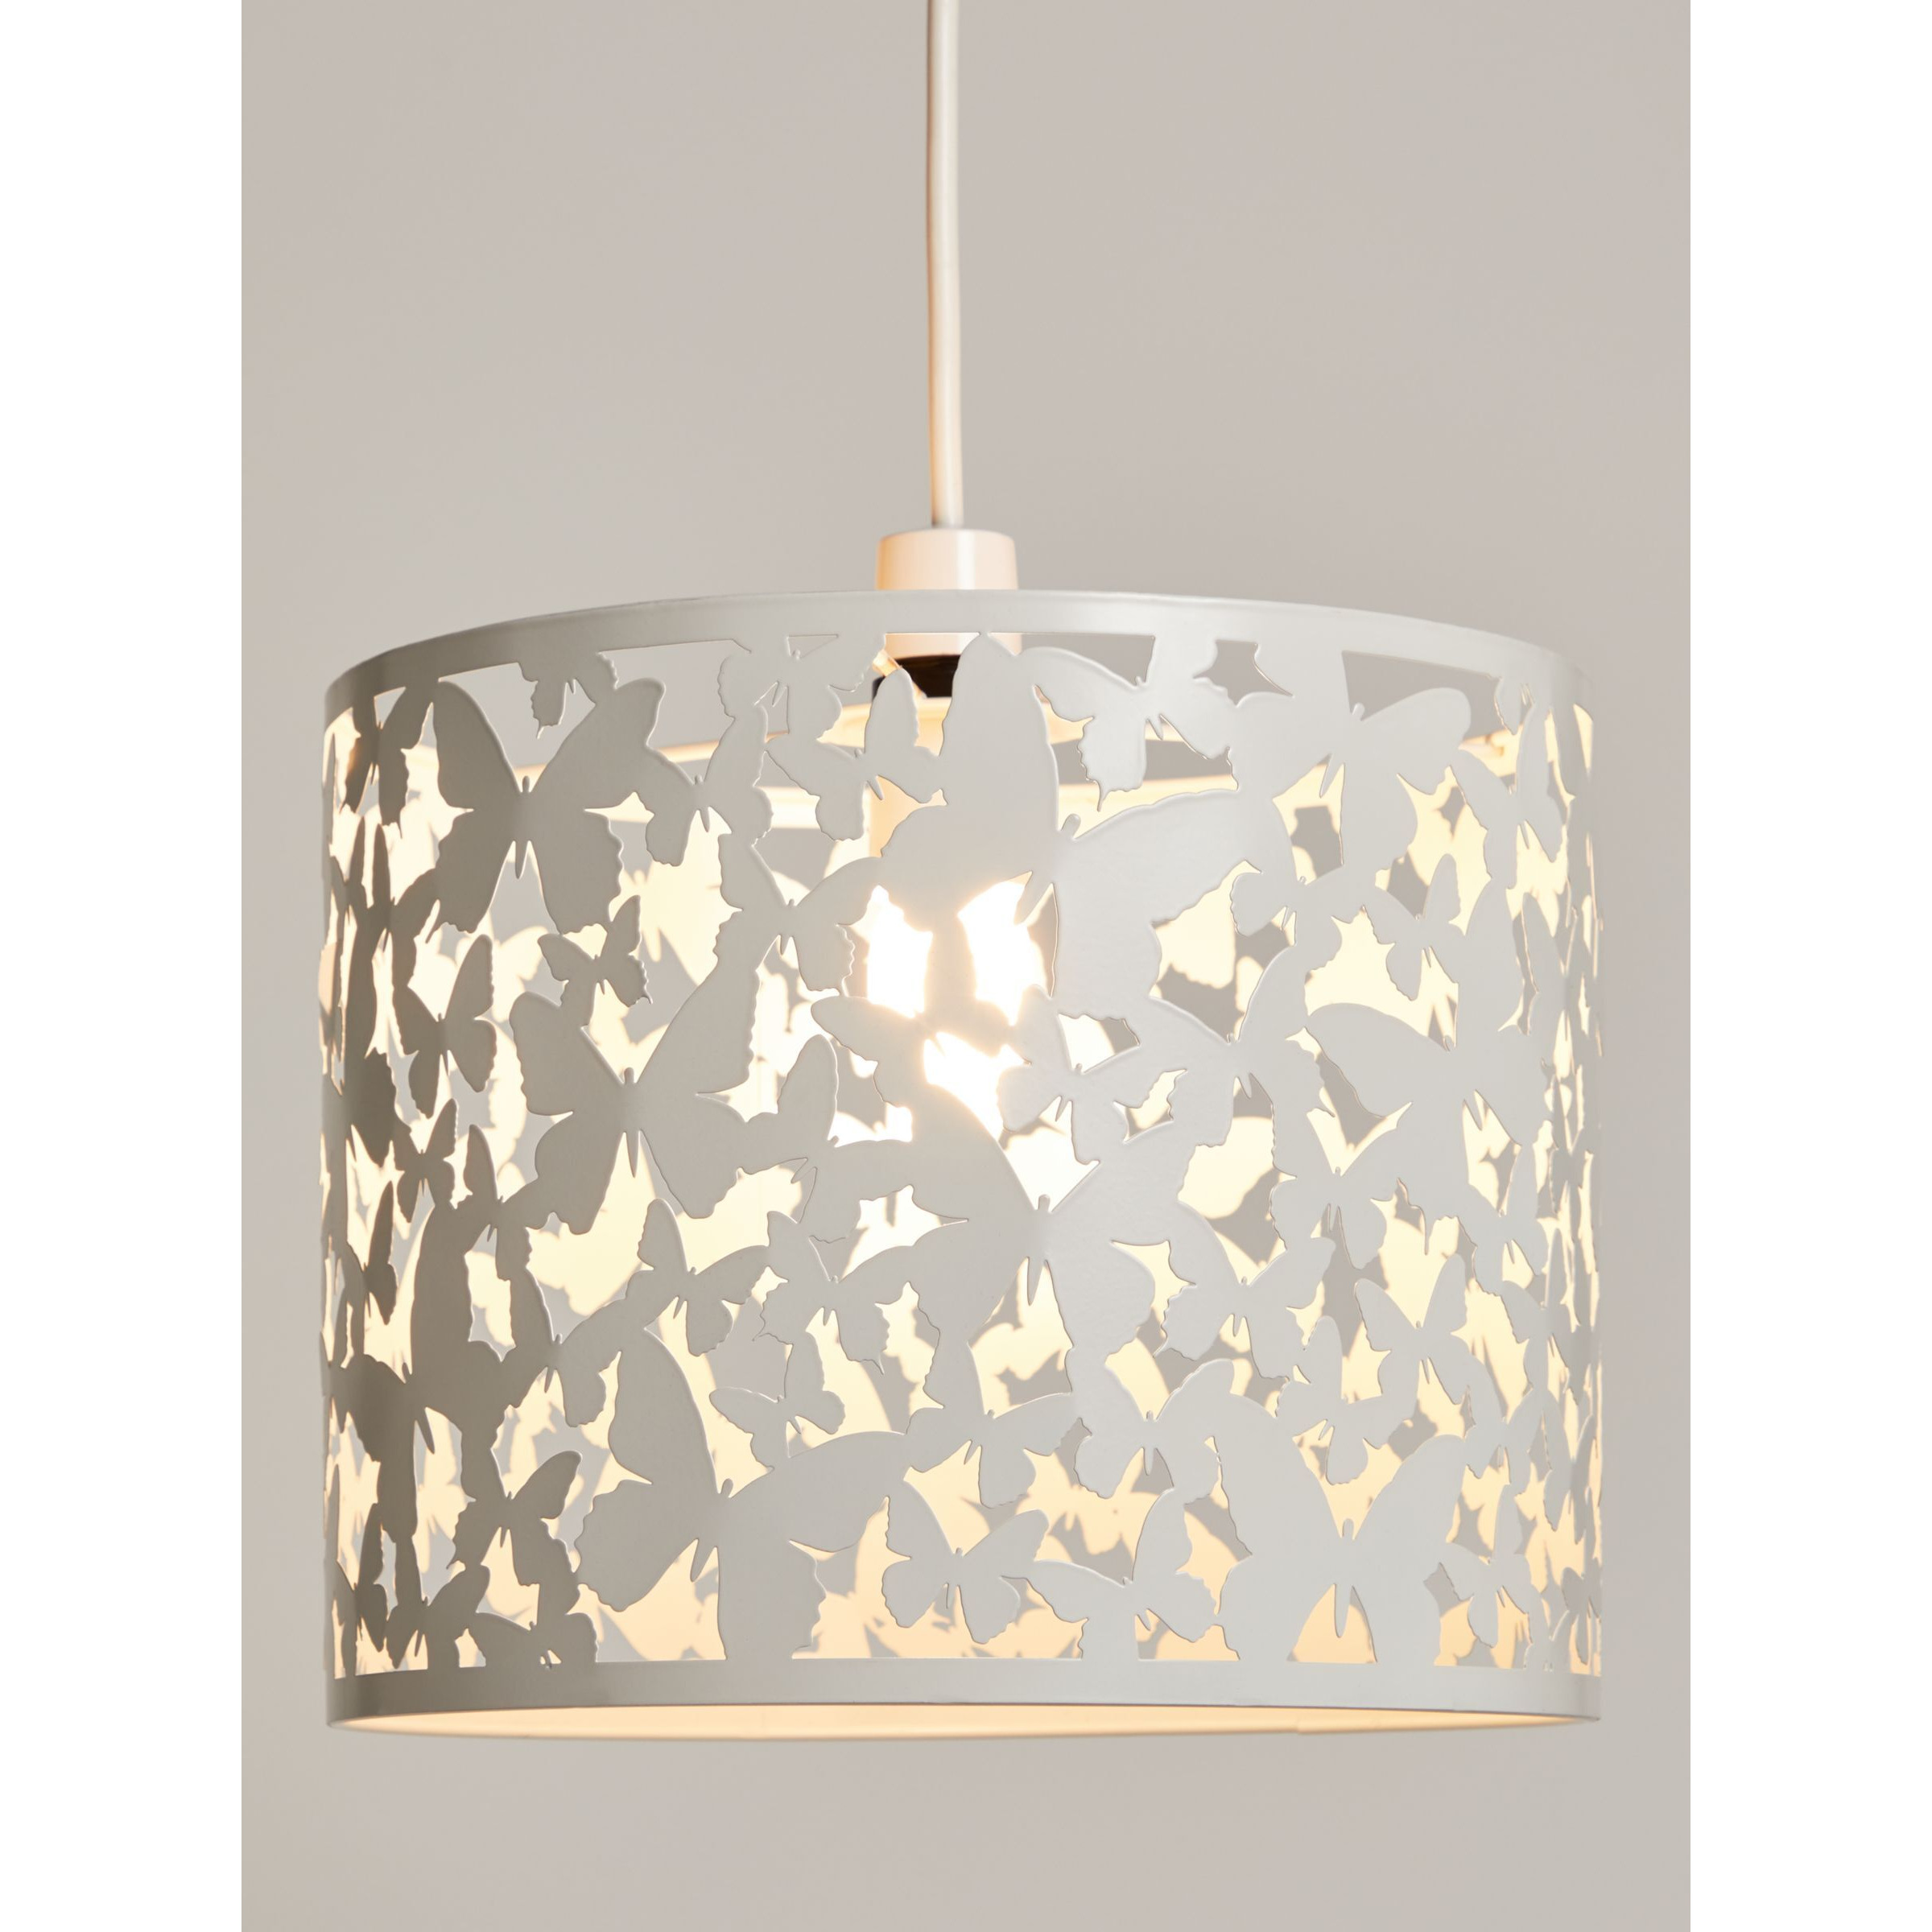 John Lewis Butterflies Easy-to-Fit Ceiling Shade, White - image 1